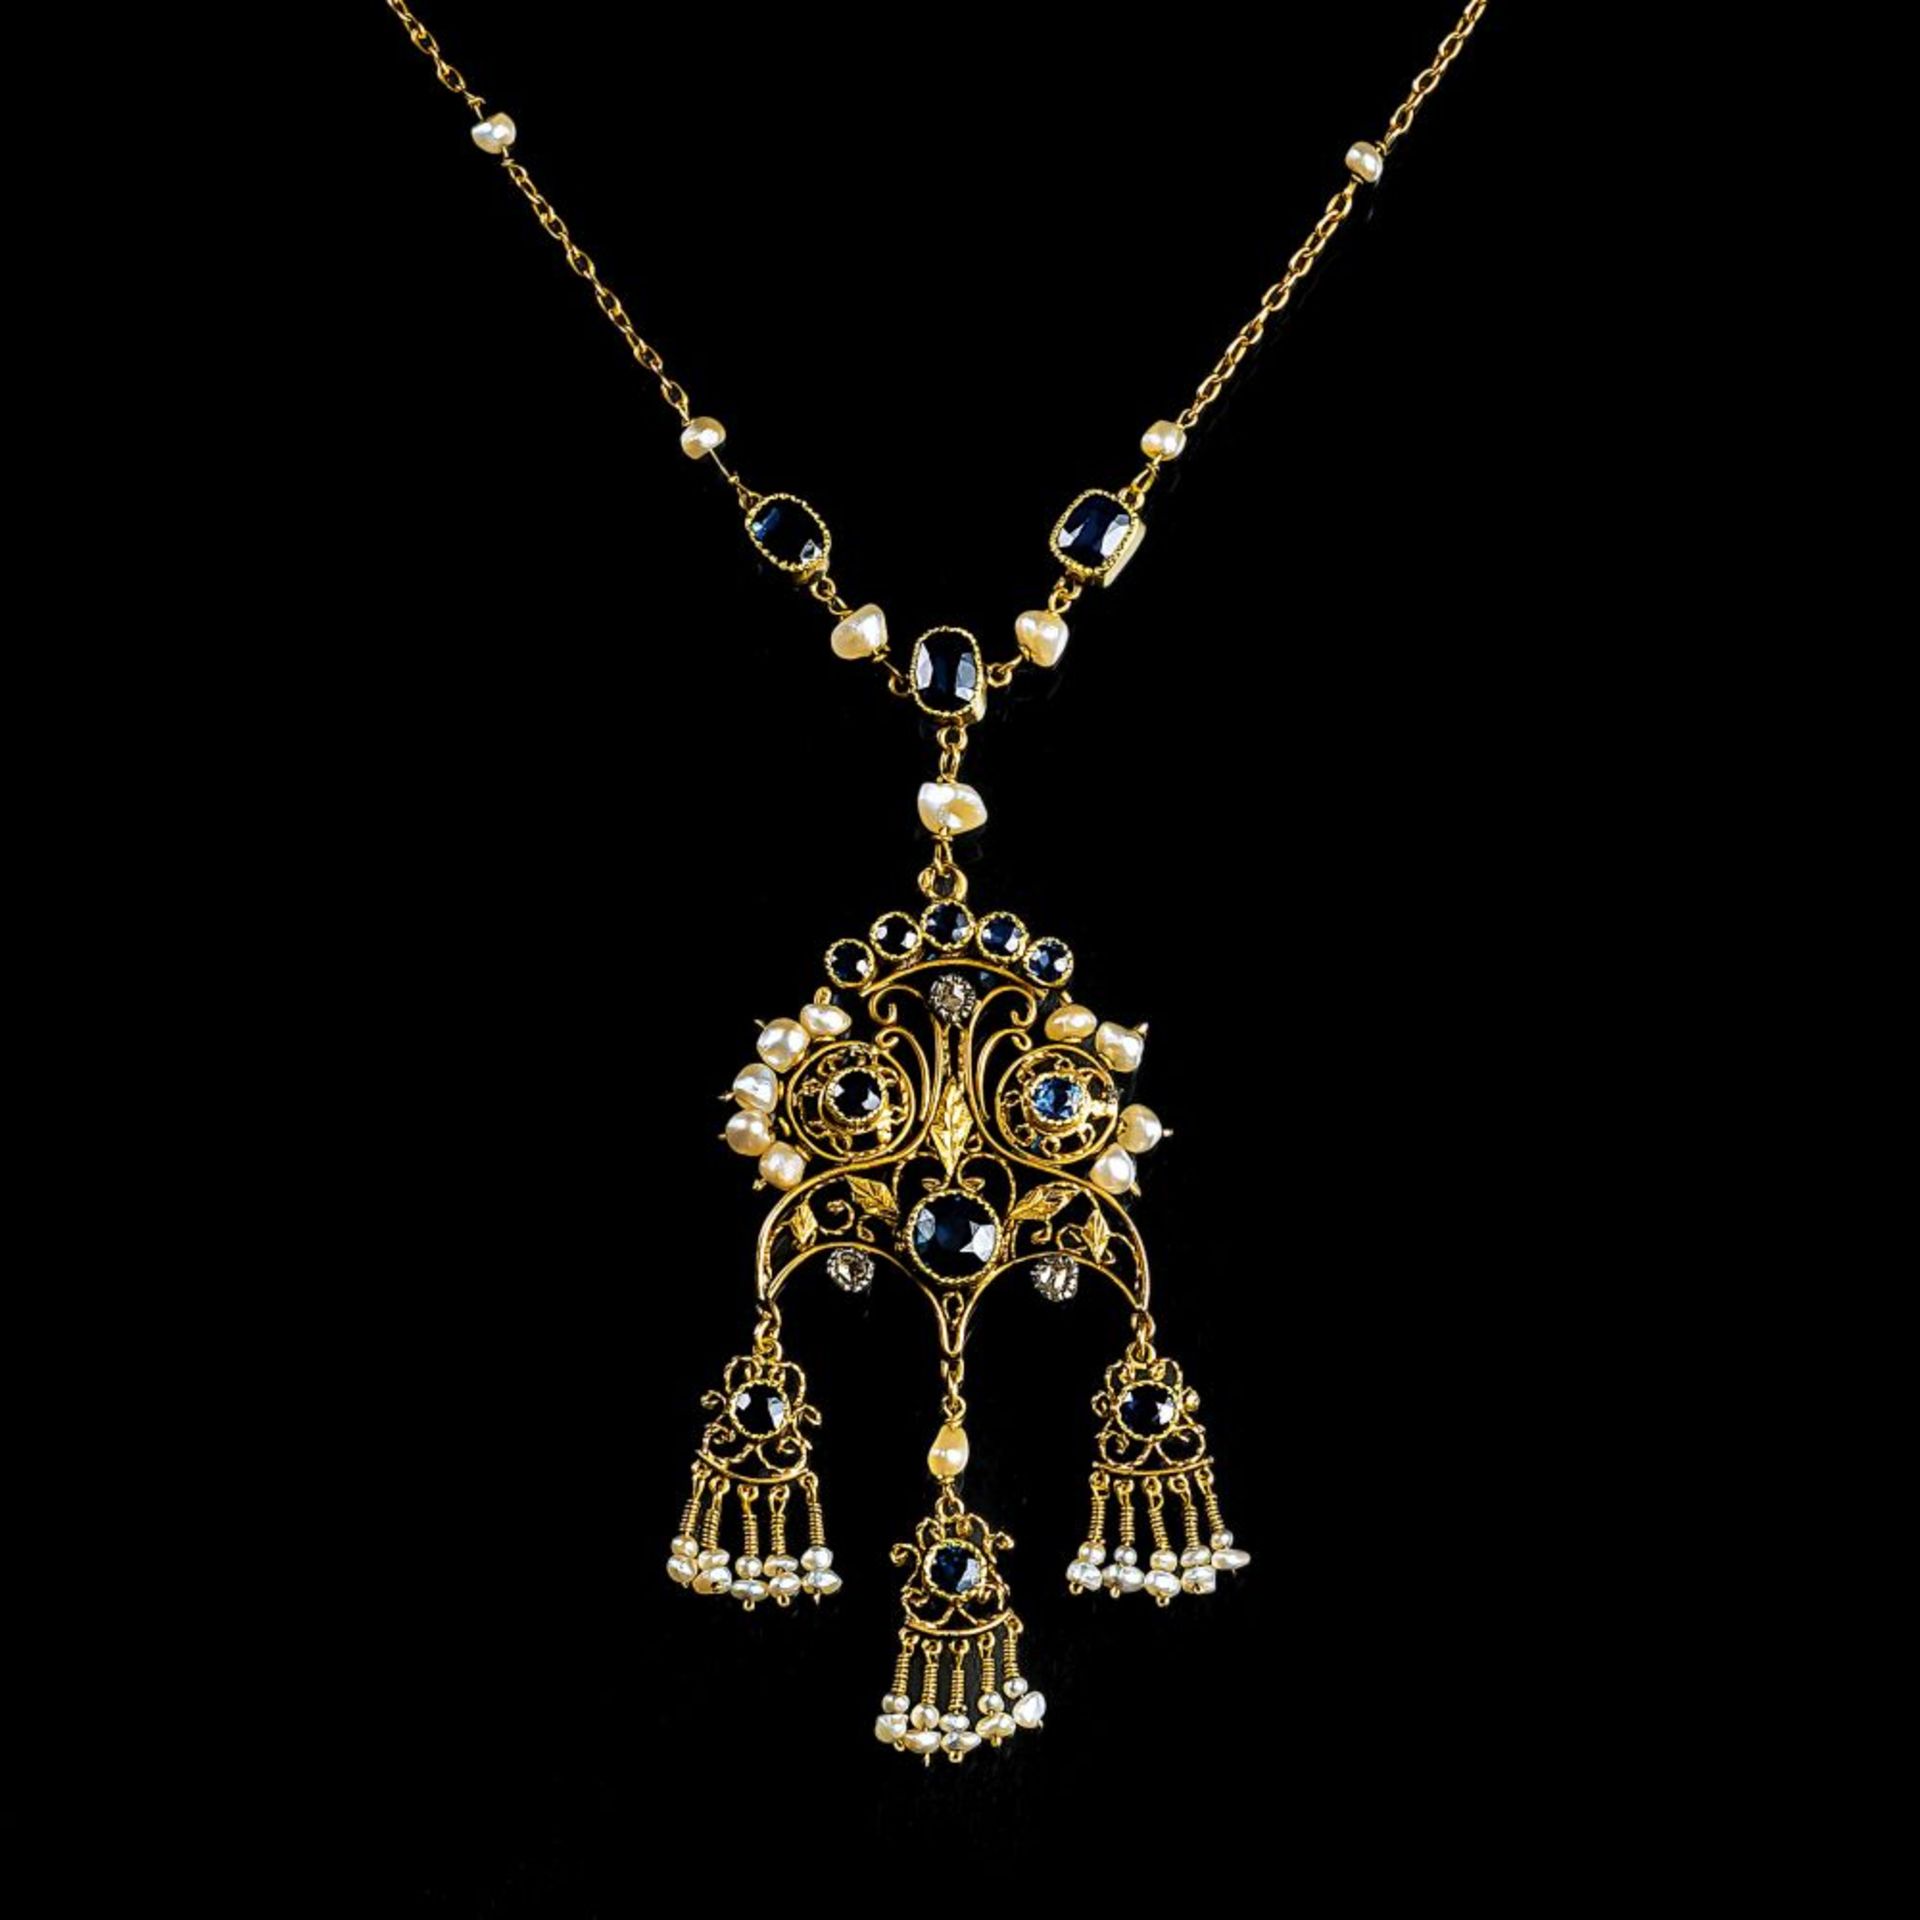 An antique Napoloen III Filigree Sapphire Necklace with Seedpearls.